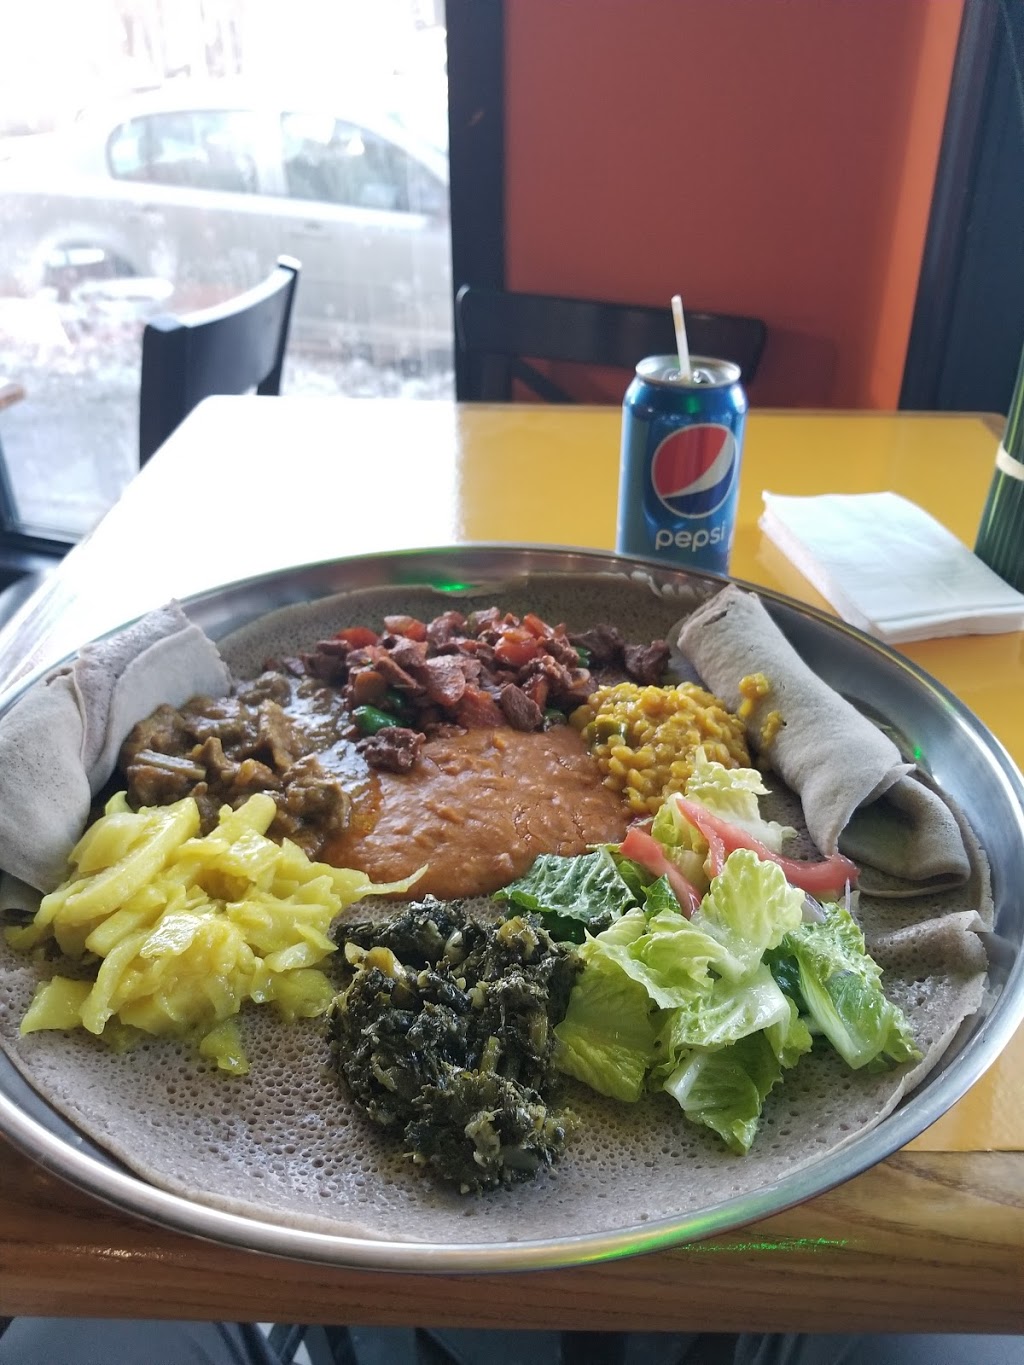 Koultures Afro-Continental Restaurant | restaurant | 8803 118 Ave NW, Edmonton, AB T5B 0T3, Canada | 7802443500 OR +1 780-244-3500